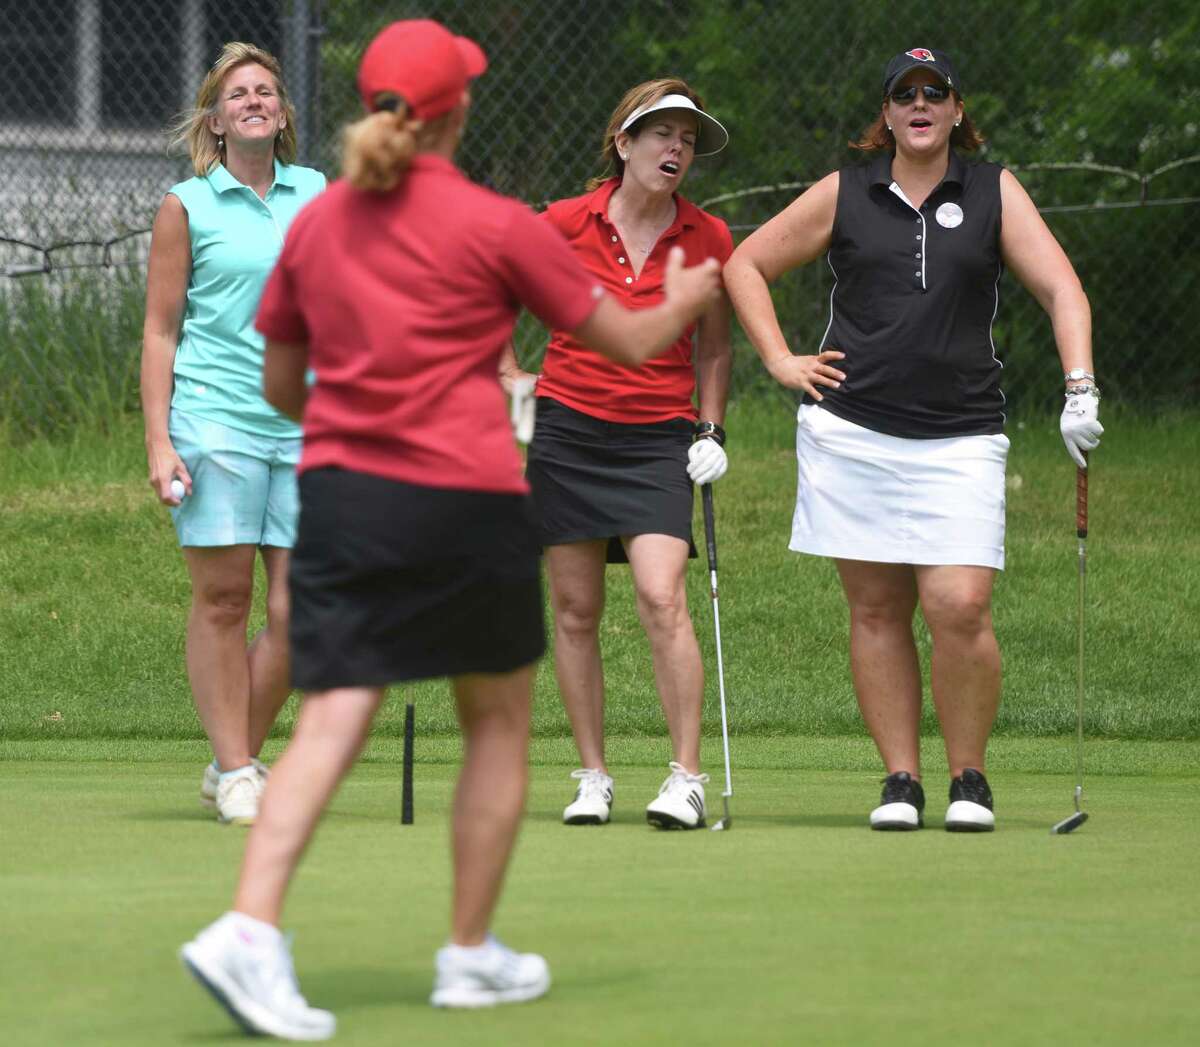 Greenwich women, from left, Patty Waurishuk, Renee Murphy, Maureen Sheehan and Laurie Meek react to a missed putt during the Greenwich High School football annual fundraiser golf tournament at E. Gaynor Brennan Golf Course in Stamford, Conn. Monday, June 8, 2015. Thirty foursomes, a total of 120 people, participated in this year's best-ball tournament to raise money for the Greenwich High School football program.